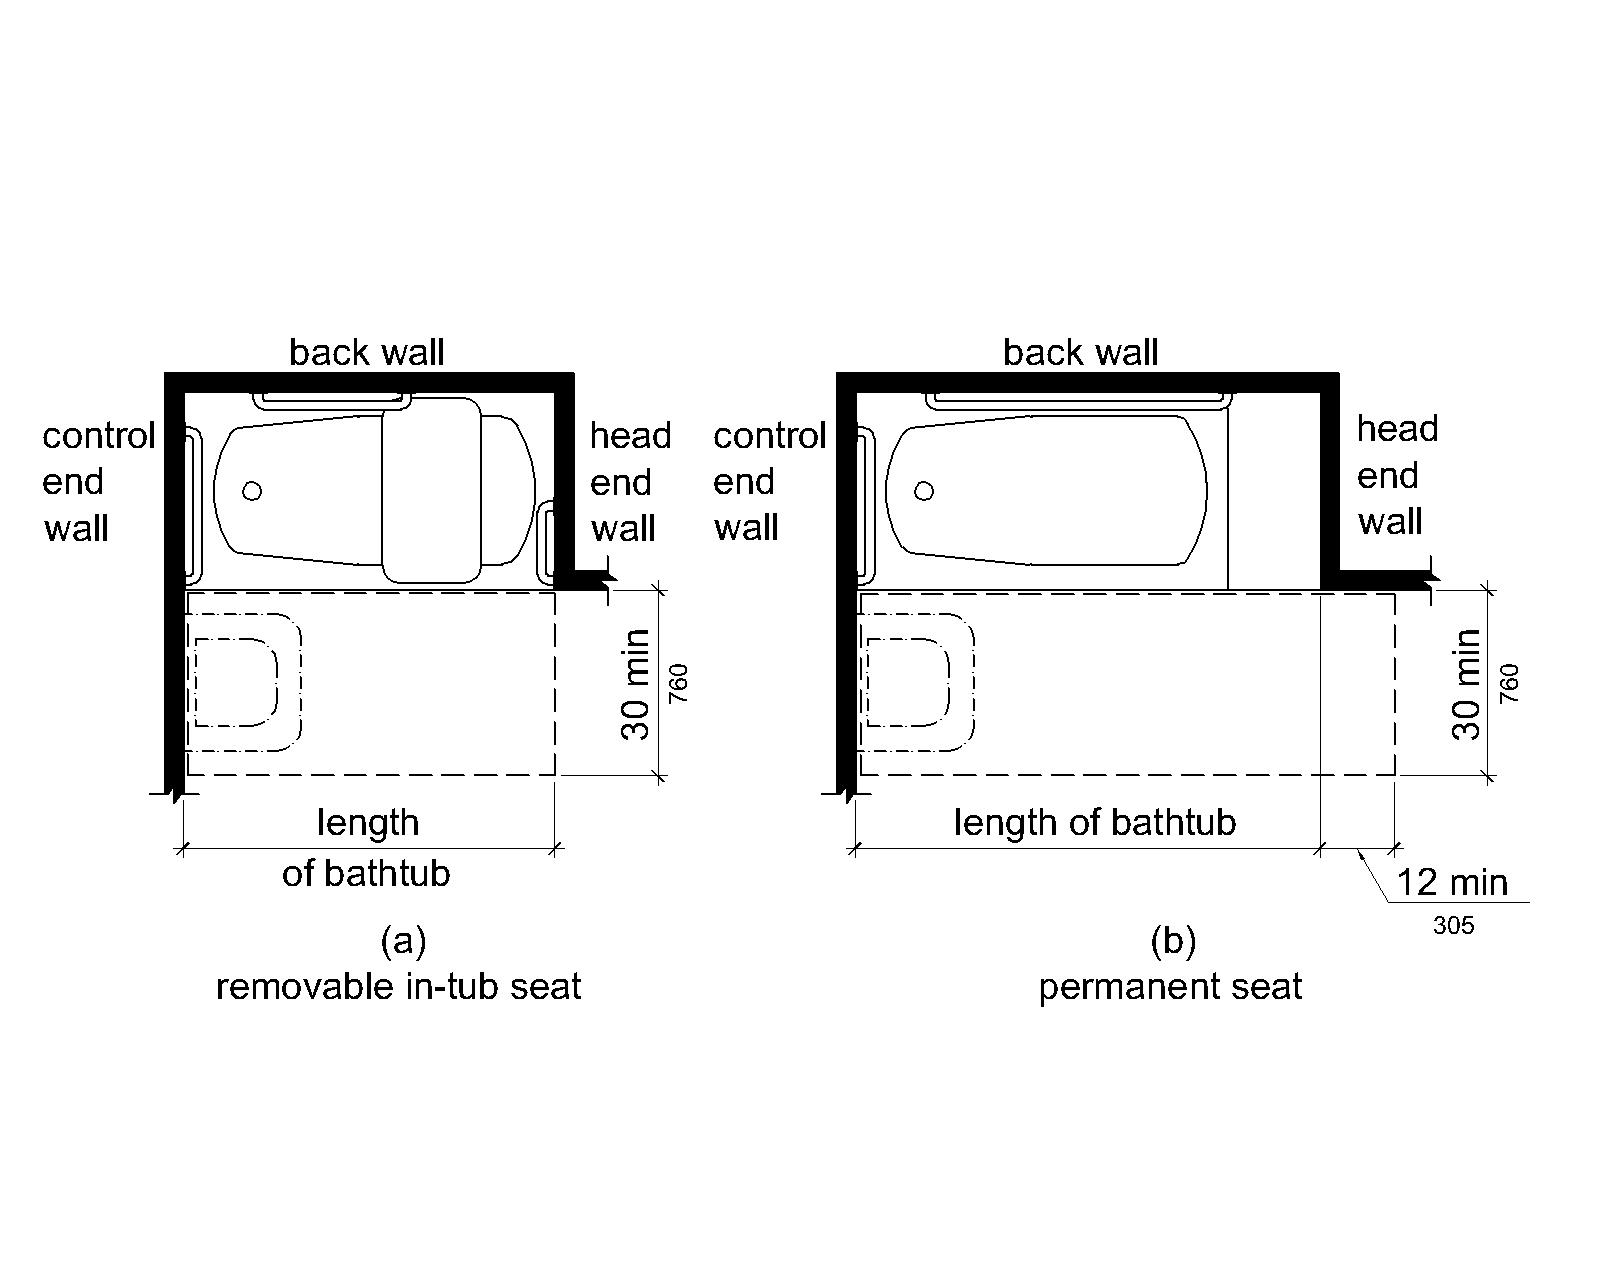 Figure (a) shows a bathtub with a removable in-tub seat. The bathtub has clearance in front 30 inches (760 mm) wide minimum that extends the length of the tub. Figure (b) shows a bathtub with a permanent seat at the head end (the end opposite the controls). The tub has clearance in front 30 inches (760 mm) wide minimum that extends the length of the tub plus 12 inches (305 mm) minimum beyond the seat. Both figures show that a lavatory can be located at the foot end of the tub clearance.